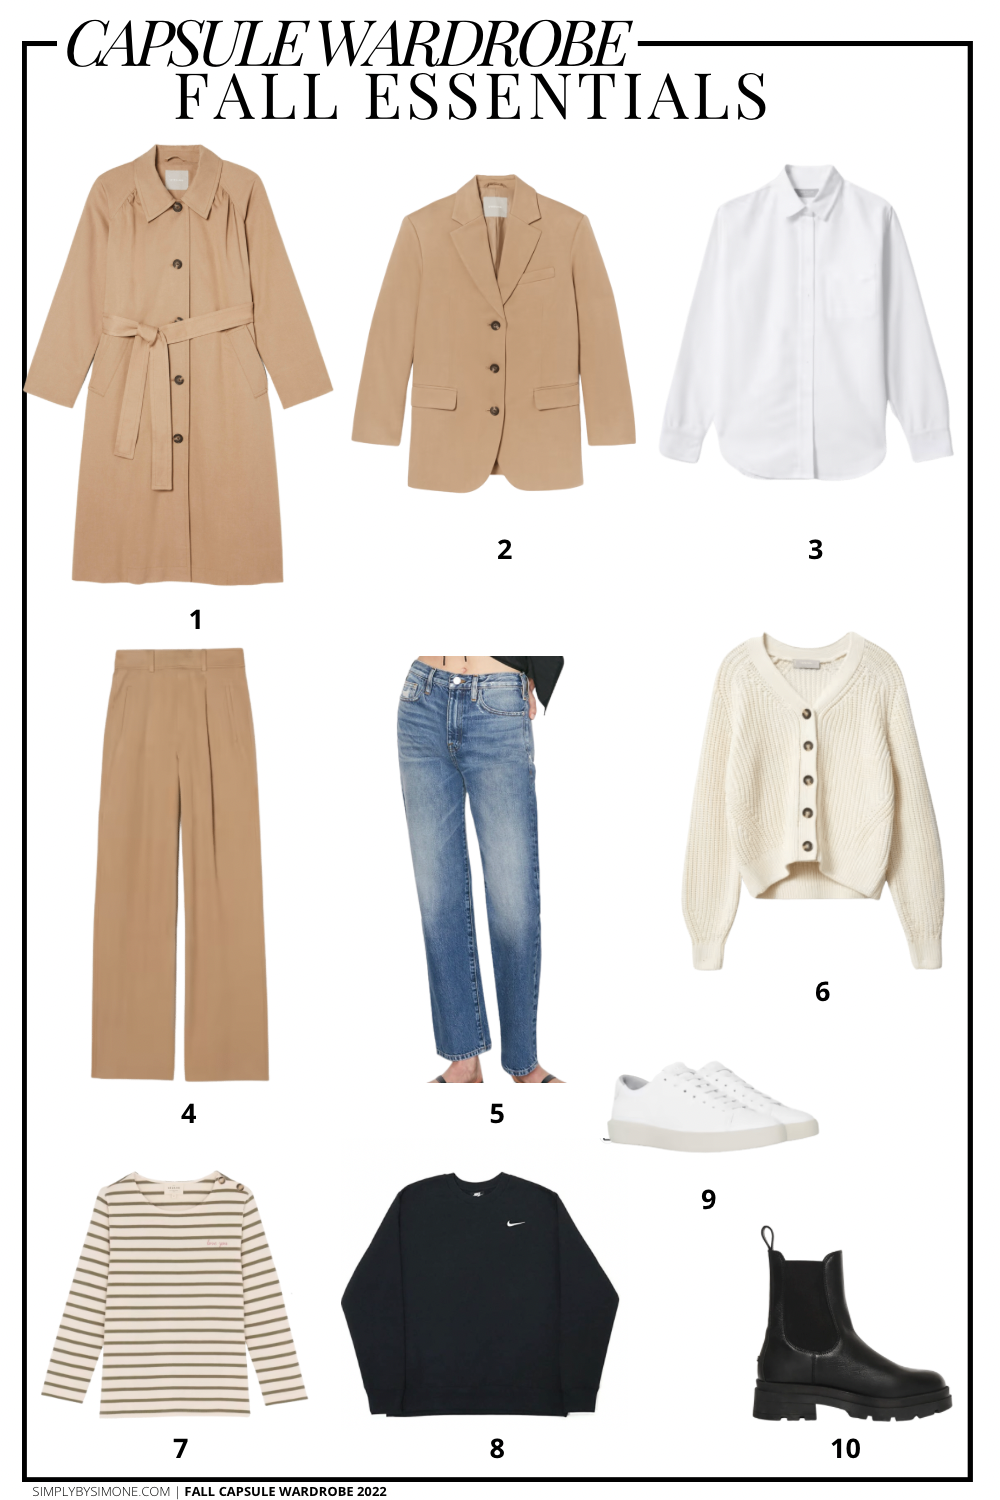 Capsule Wardrobe Essentials for Fall 2022 | 10 Essential Pieces | How to Build a Capsule Wardrobe | Fall Clothes | Outfit Inspiration | Fall Weather Outfit Ideas | Fall Vacation Packing Guide | Fall Capsule Wardrobe - What To Wear This Fall 2022 | Parisian Outfit Ideas | Items 1-10 | Simply by Simone